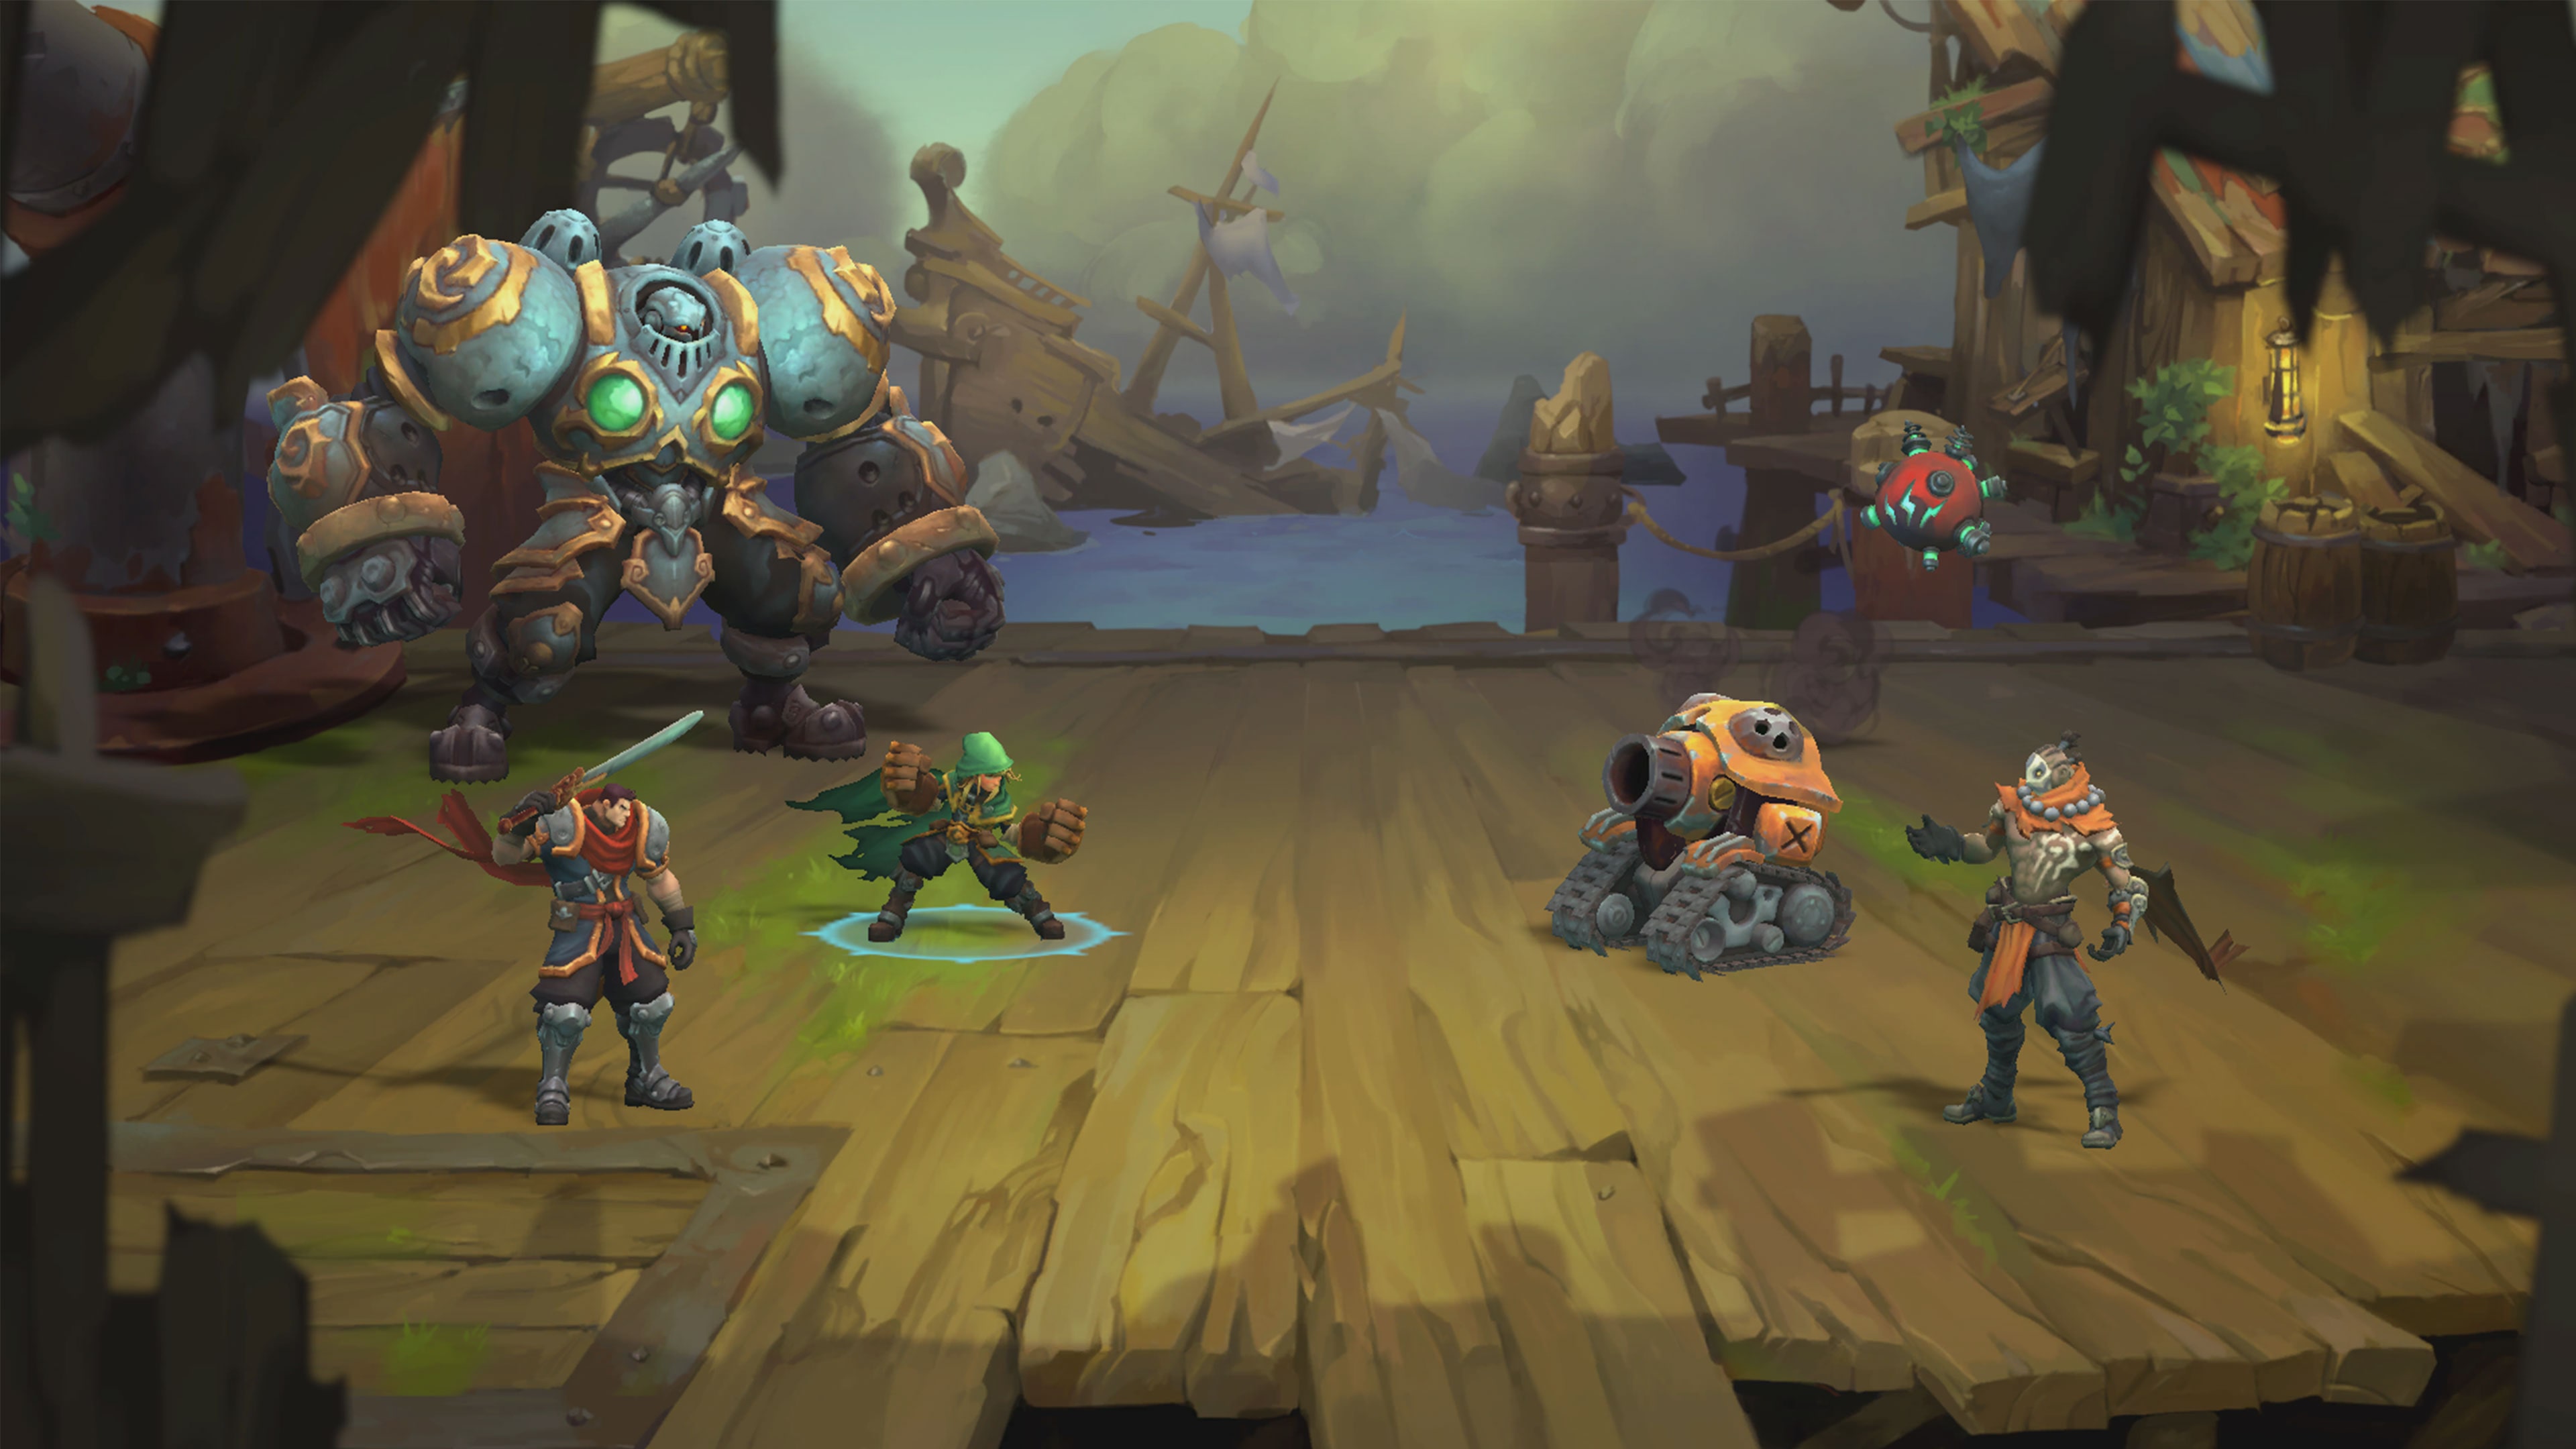 Battle Chasers: